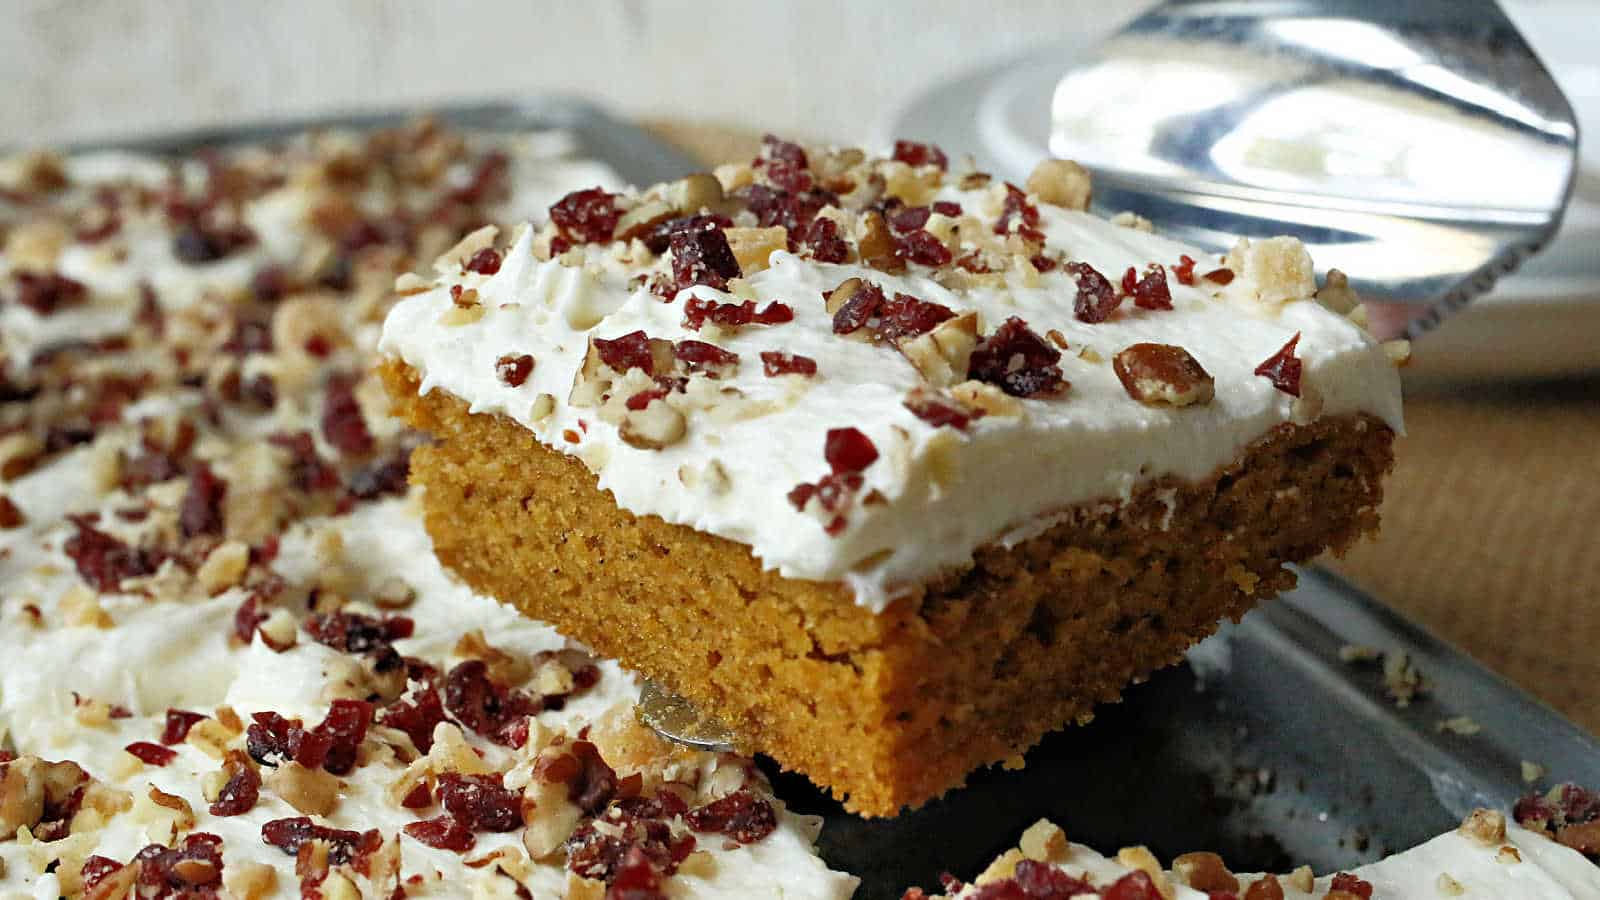 A slice of pumpkin cake with white icing.